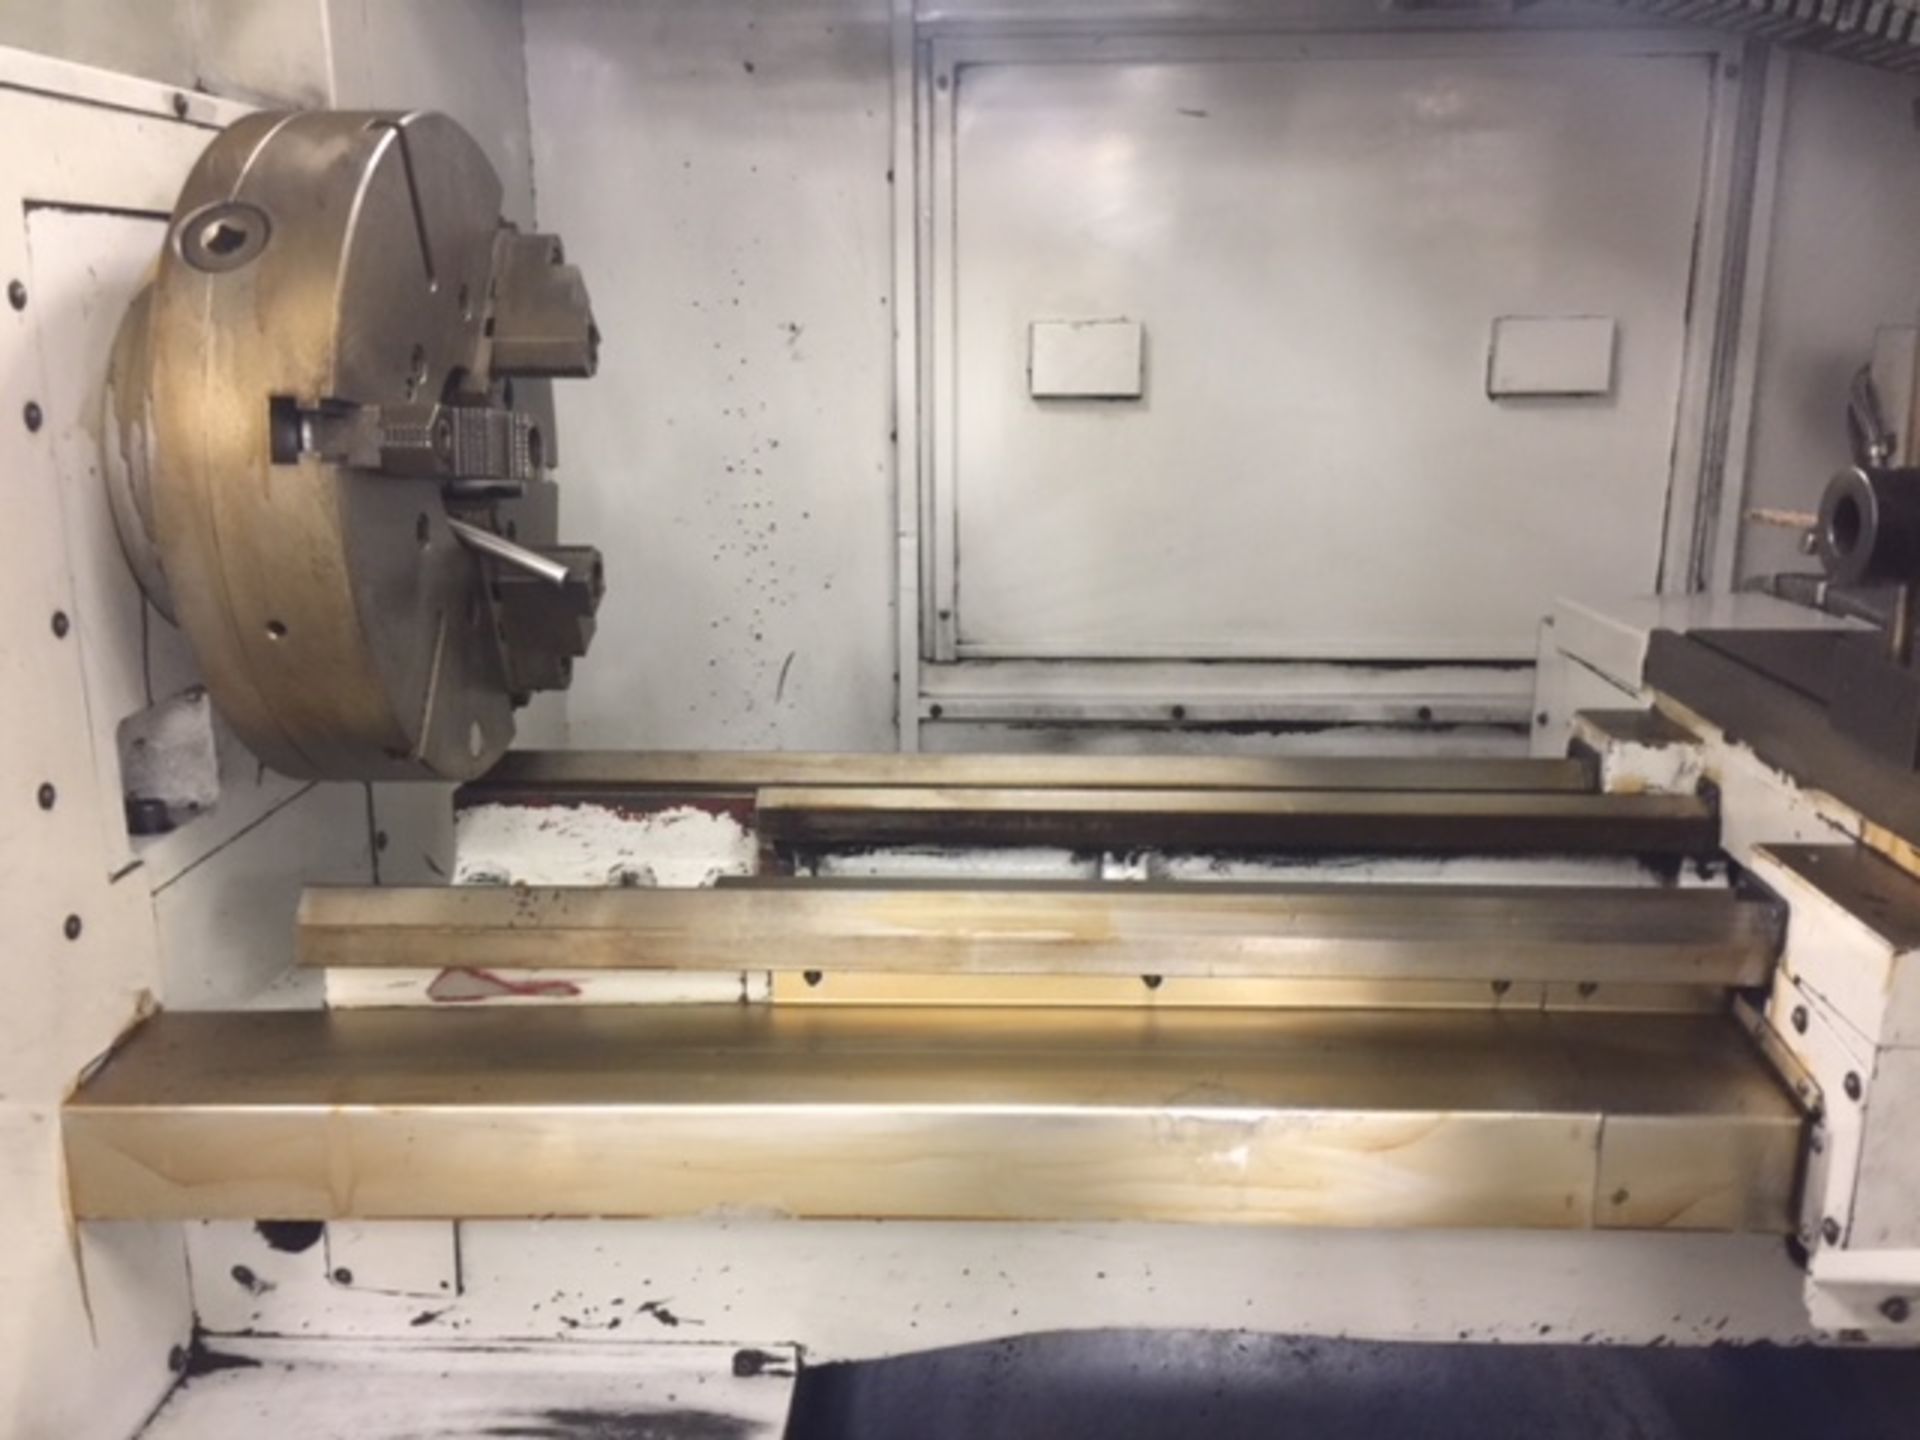 24" x 40" Acra Model FEL-24x40-ENC CNC Lathe with C Axis Milling - Image 6 of 10